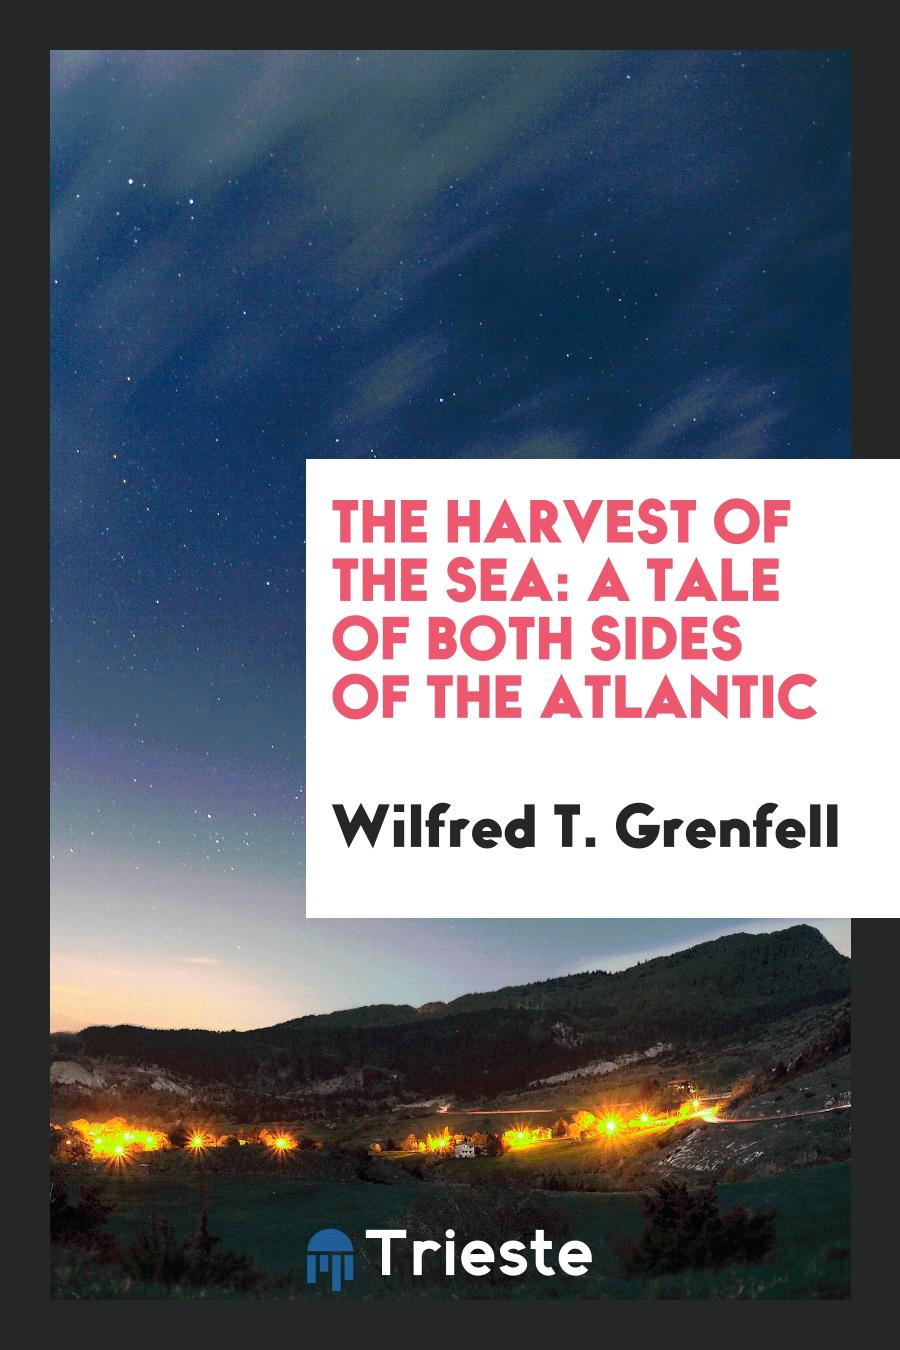 The Harvest of the Sea: A Tale of Both Sides of the Atlantic